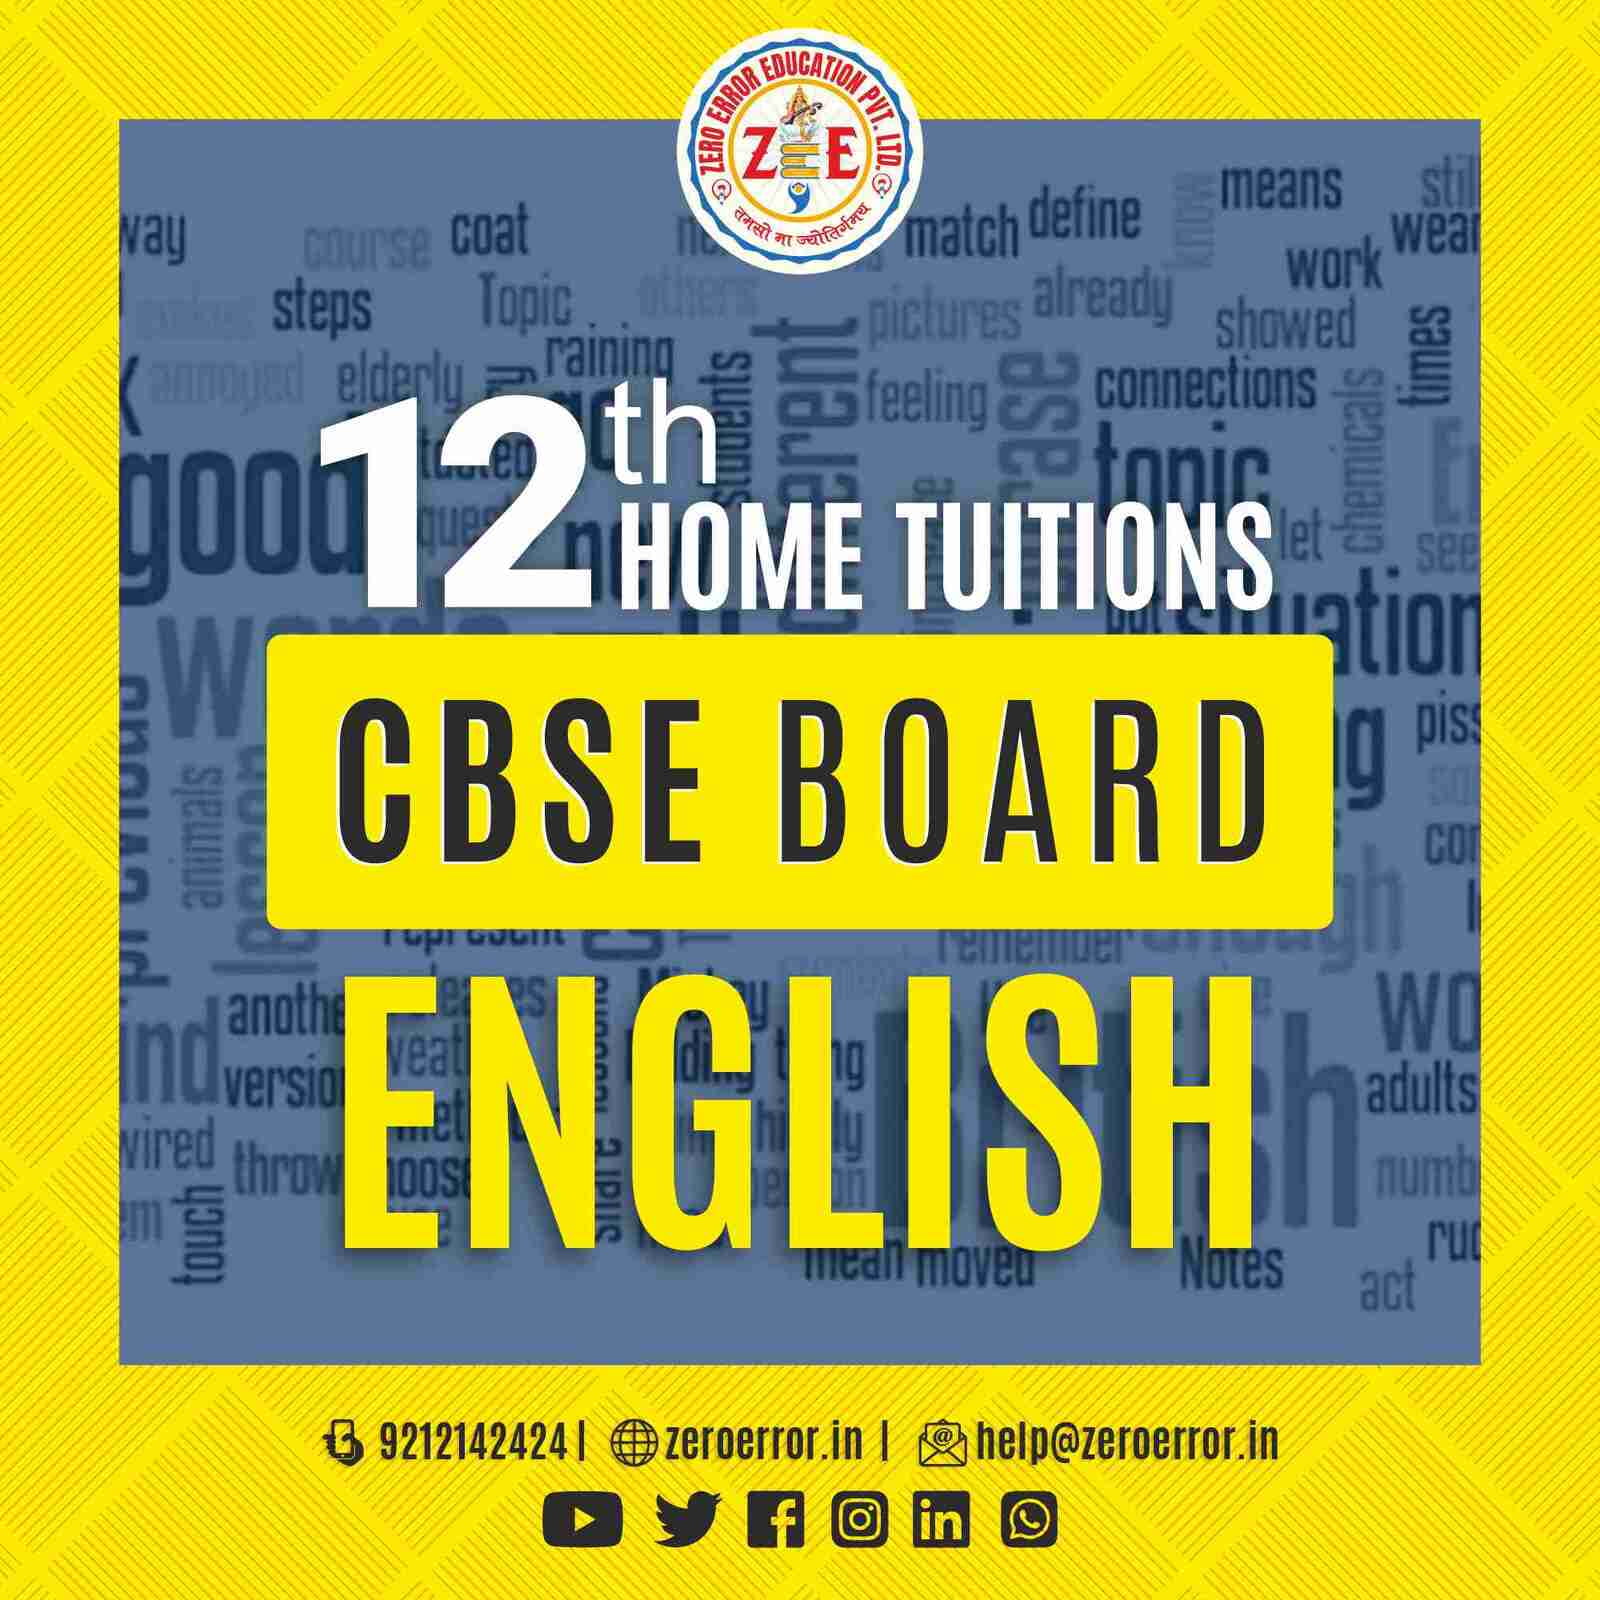 12th Grade CBSE English Online Classes by Zero Error Education Prepare for your CBSE board exams with online and offline English classes for 12th grade. Learn from experienced home tutors and get all the help you need to succeed. Enroll today at Zero Error Education. [https://zeroerror.in/] Call 9212142424 for more information.